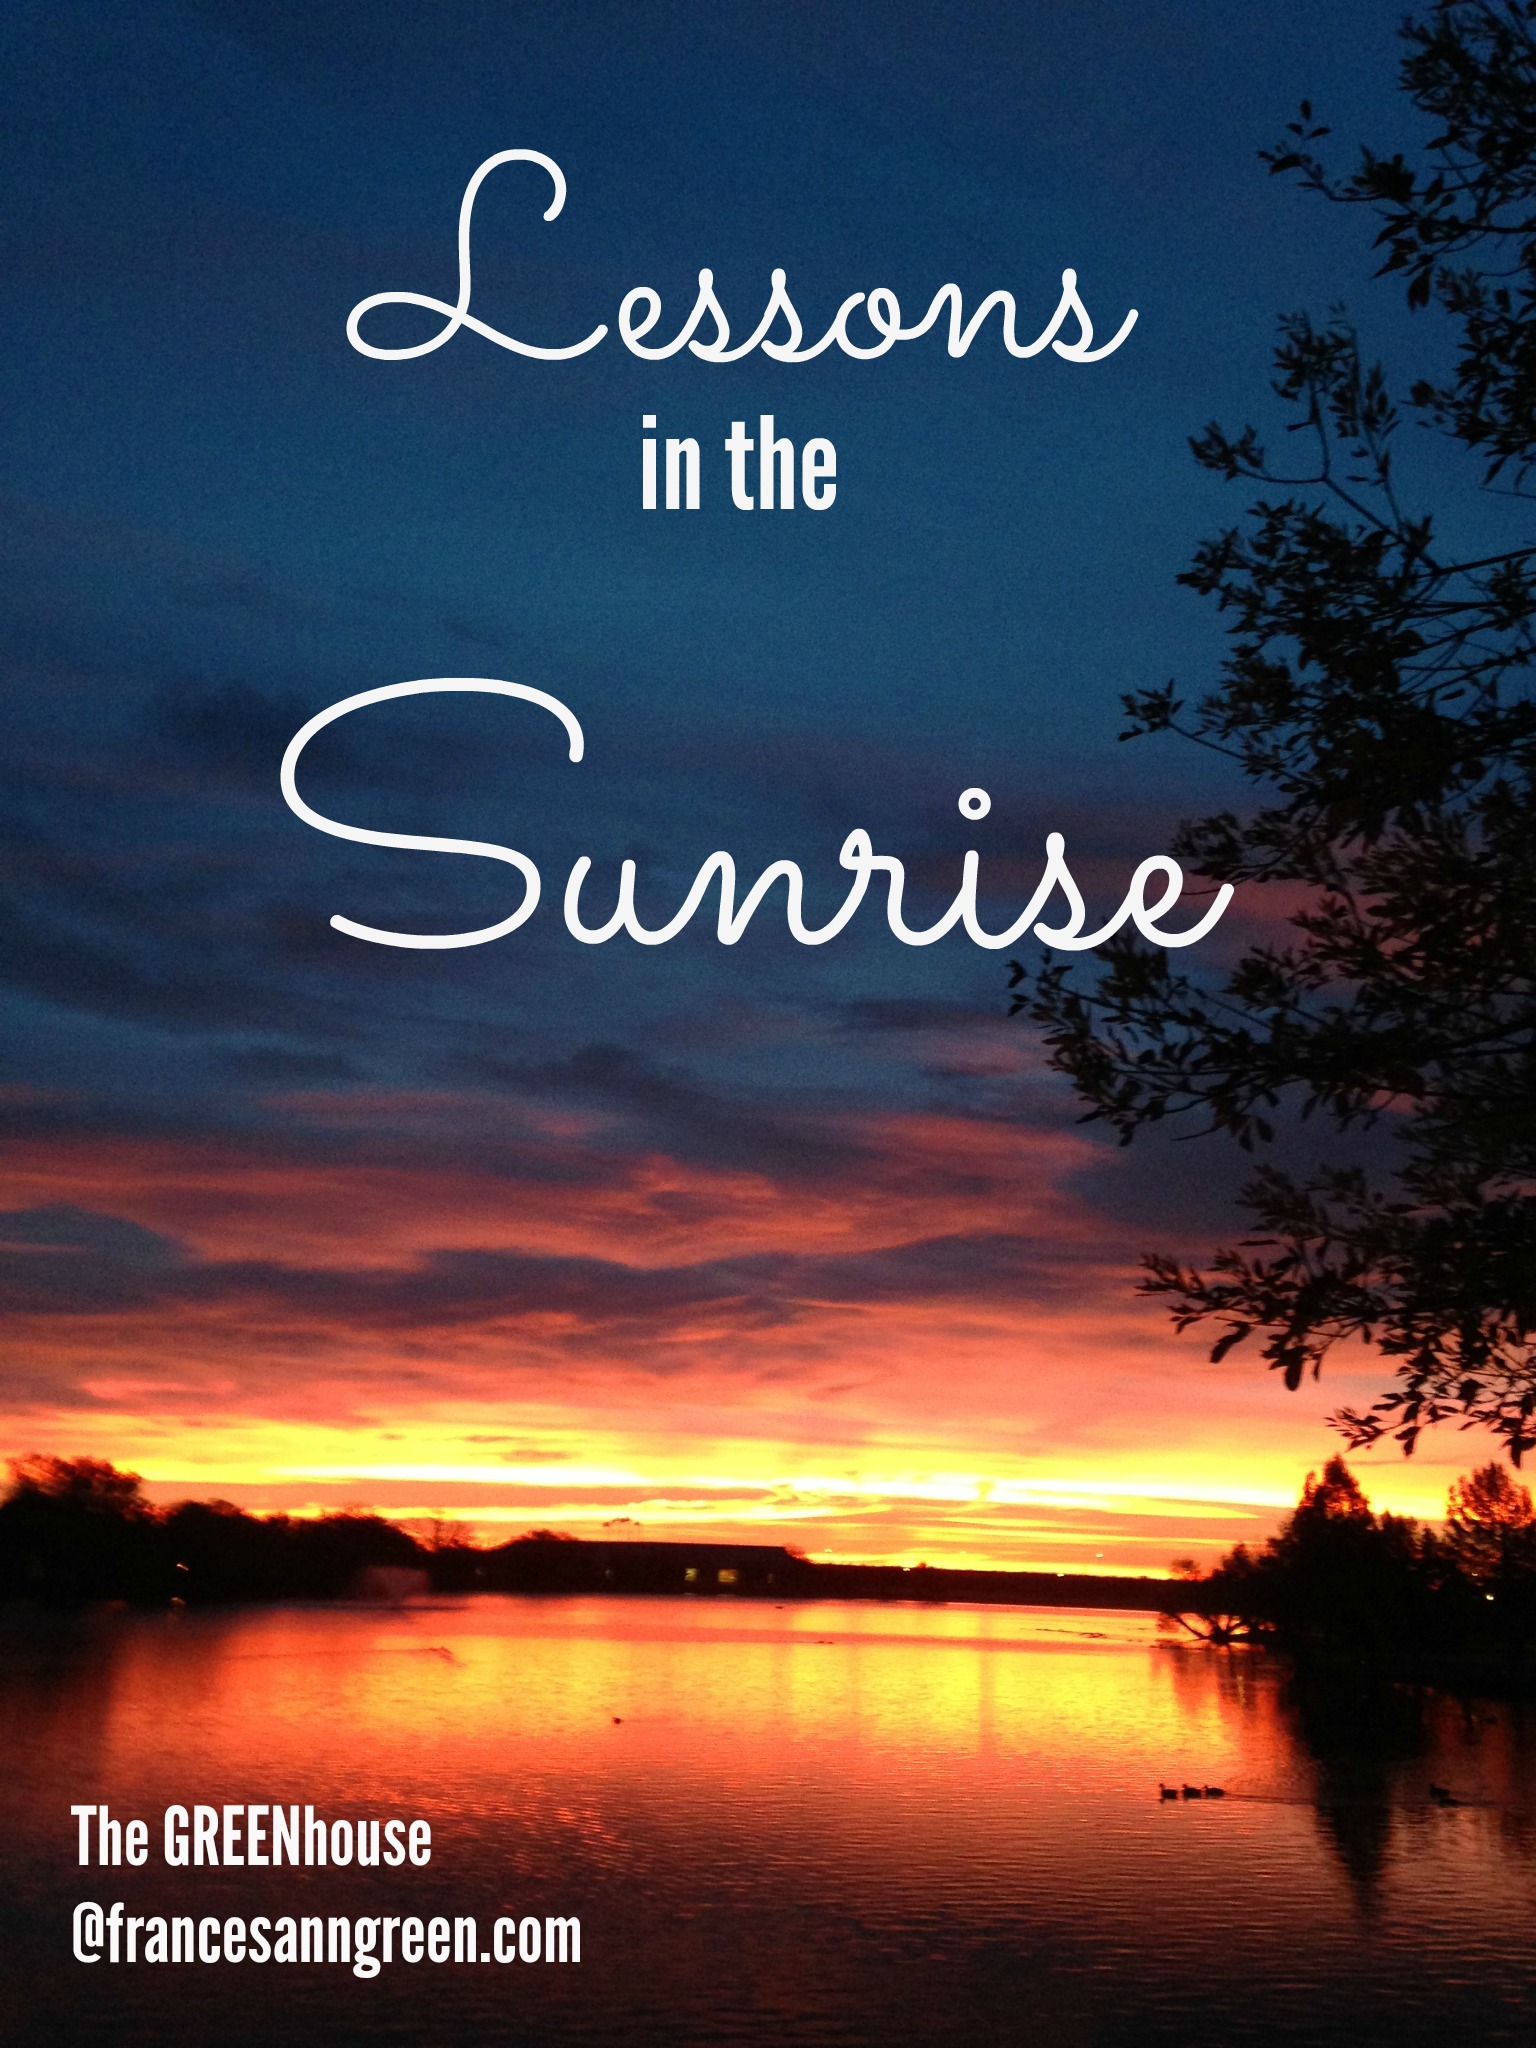 Lessons in the sunrise